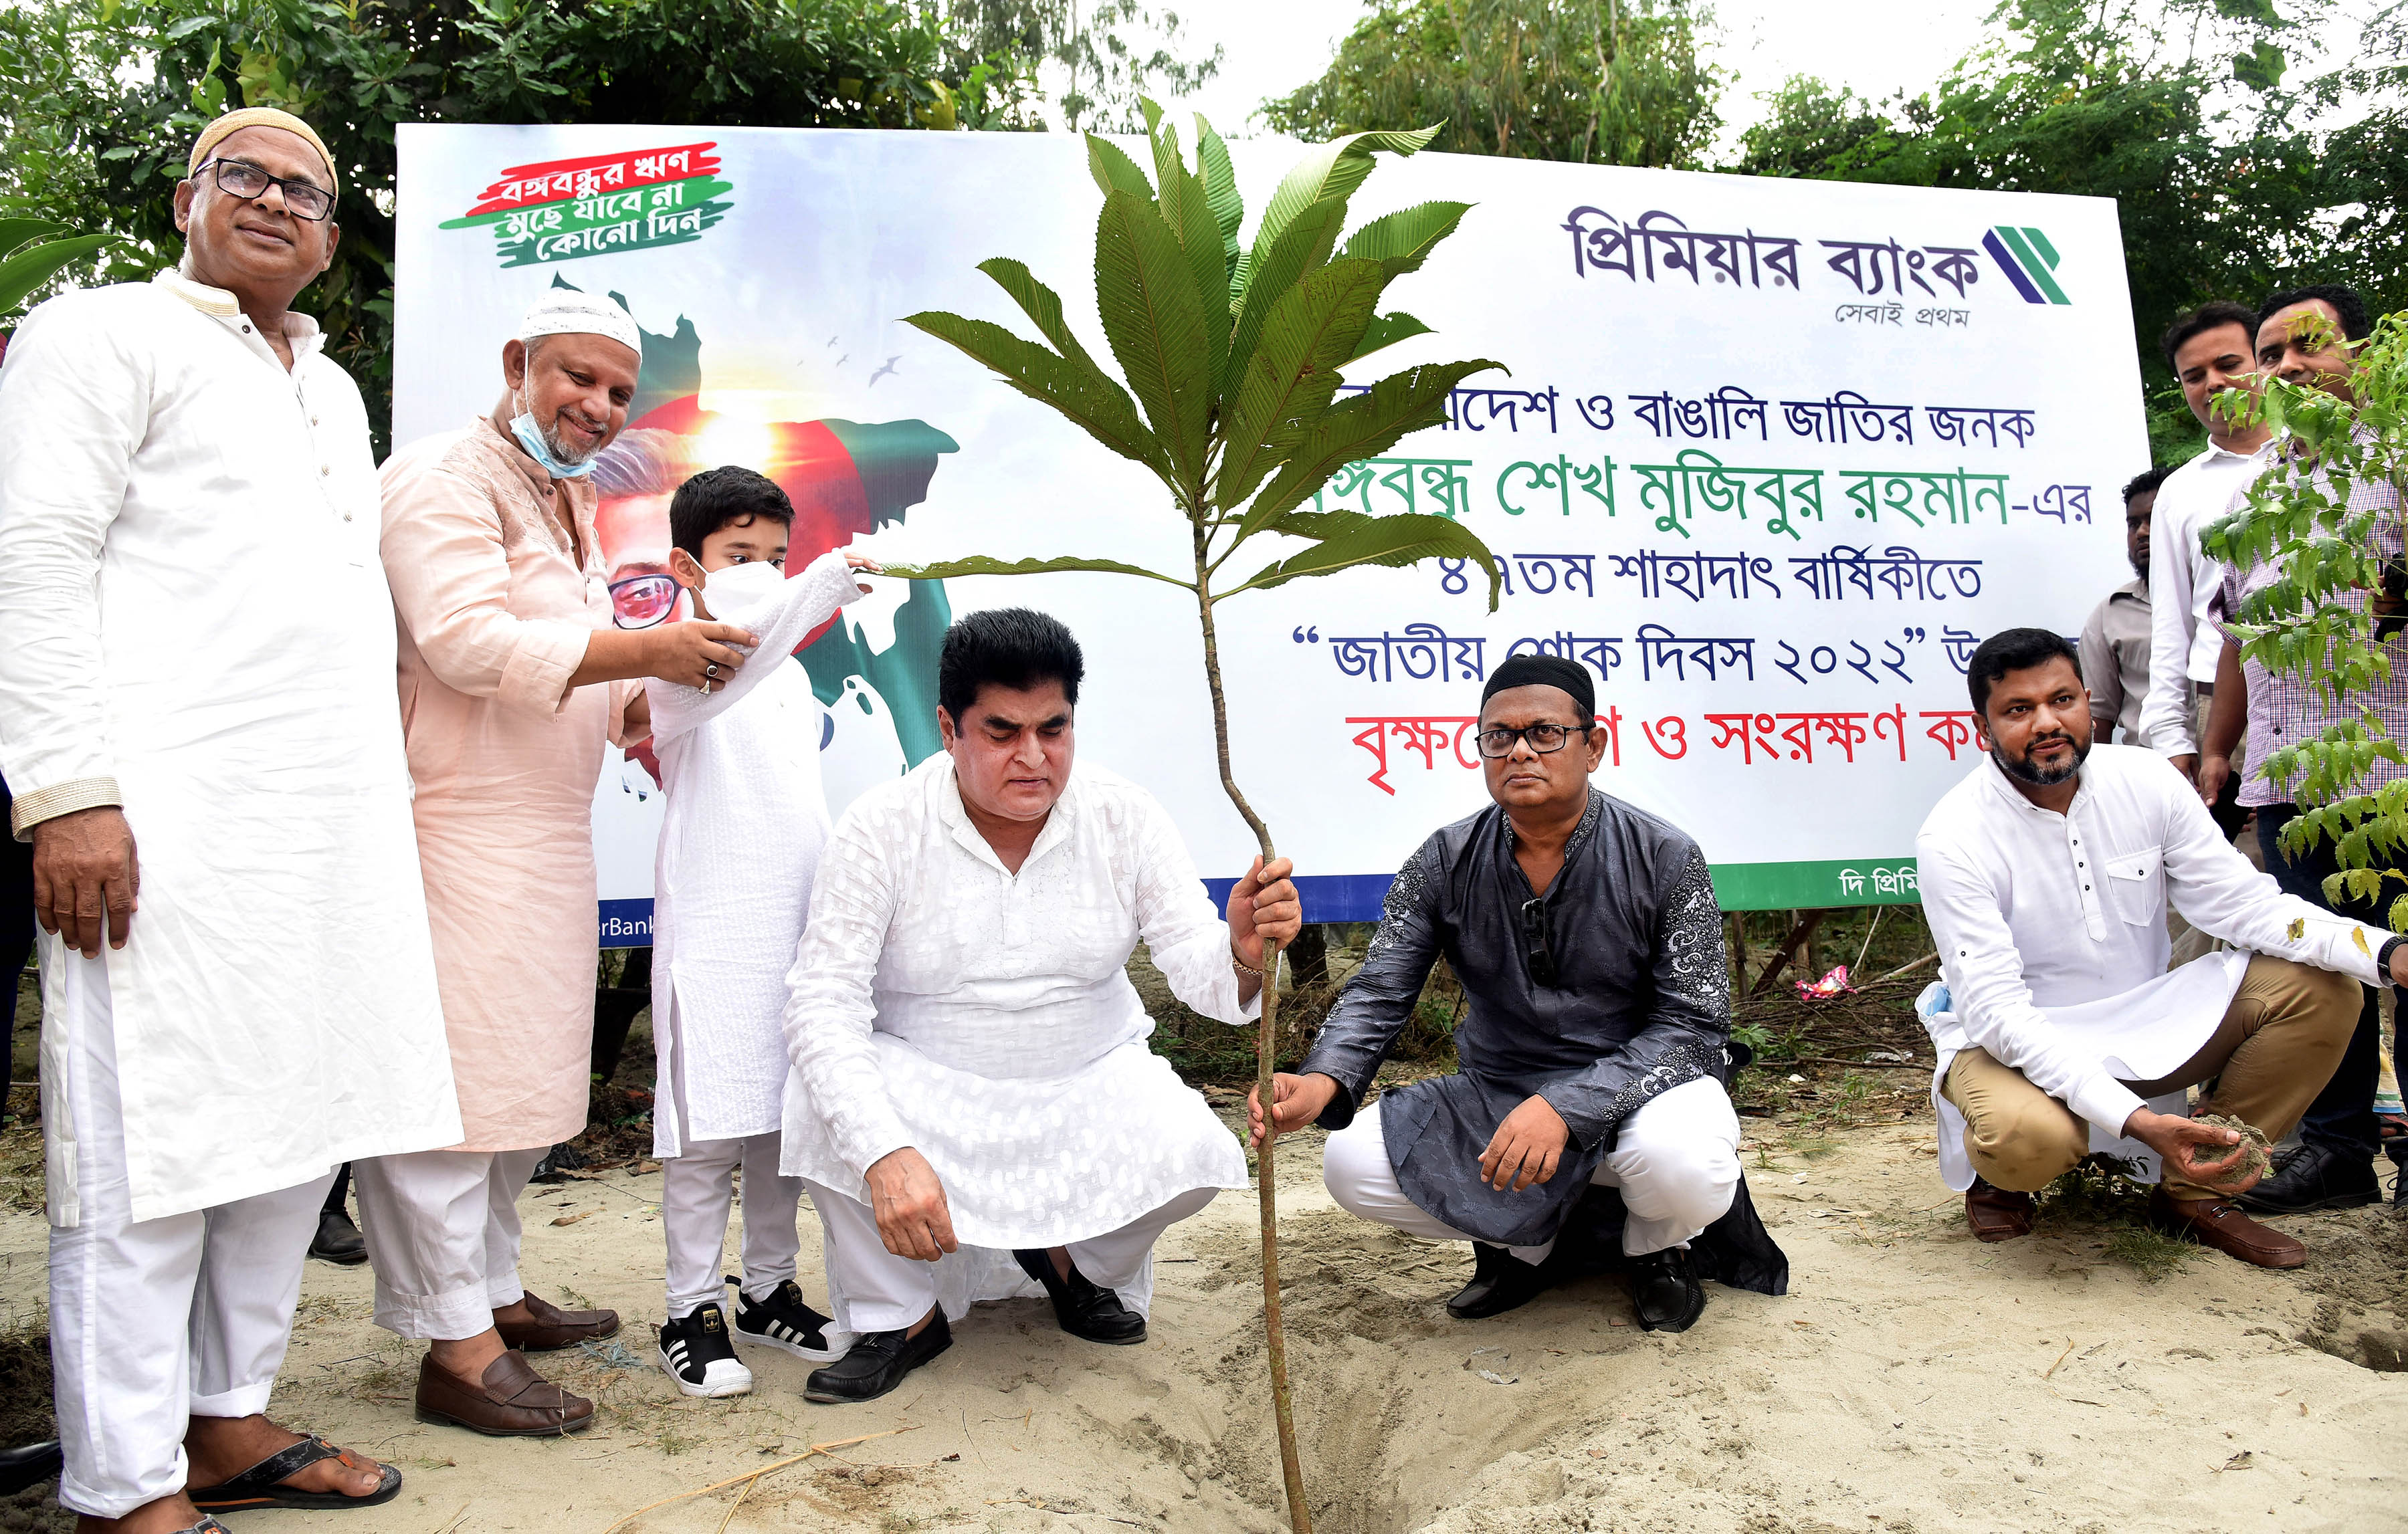 Plantation and conservation program on National Mourning Day by Premier Bank